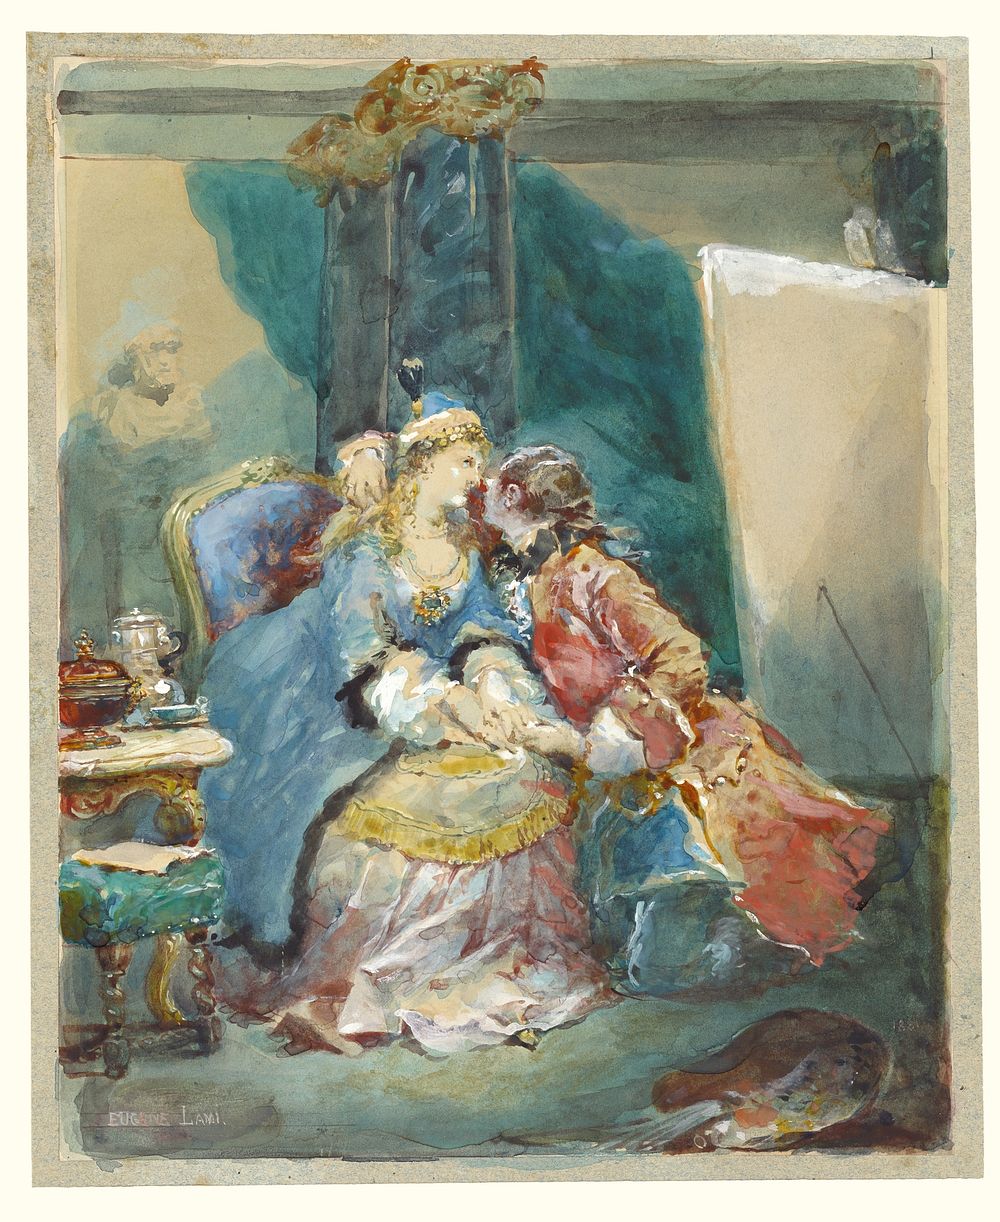 A Couple Embracing in an Artist's Studio by Eugène Louis Lami